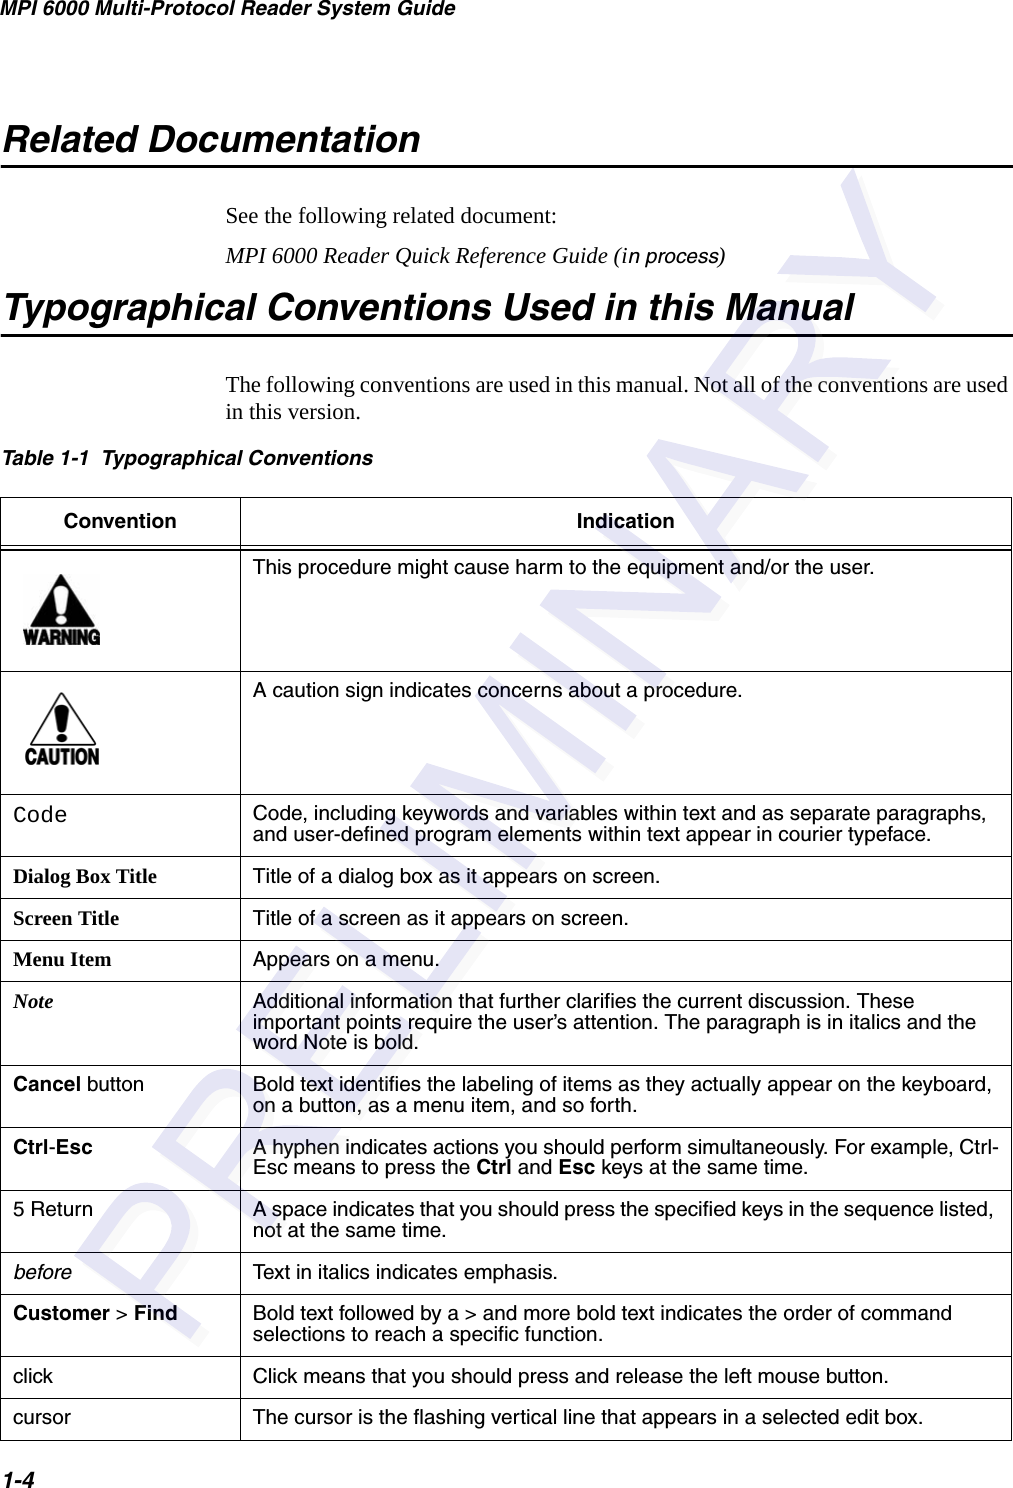 MPI 6000 Multi-Protocol Reader System Guide1-4Related DocumentationSee the following related document:MPI 6000 Reader Quick Reference Guide (in process)Typographical Conventions Used in this ManualThe following conventions are used in this manual. Not all of the conventions are used in this version.Table 1-1  Typographical Conventions Convention IndicationThis procedure might cause harm to the equipment and/or the user.A caution sign indicates concerns about a procedure.Code Code, including keywords and variables within text and as separate paragraphs, and user-defined program elements within text appear in courier typeface.Dialog Box Title Title of a dialog box as it appears on screen.Screen Title Title of a screen as it appears on screen.Menu Item Appears on a menu.Note Additional information that further clarifies the current discussion. These important points require the user’s attention. The paragraph is in italics and the word Note is bold.Cancel button Bold text identifies the labeling of items as they actually appear on the keyboard, on a button, as a menu item, and so forth.Ctrl-Esc A hyphen indicates actions you should perform simultaneously. For example, Ctrl-Esc means to press the Ctrl and Esc keys at the same time.5 Return A space indicates that you should press the specified keys in the sequence listed, not at the same time.before Text in italics indicates emphasis.Customer &gt; Find Bold text followed by a &gt; and more bold text indicates the order of command selections to reach a specific function. click Click means that you should press and release the left mouse button.cursor The cursor is the flashing vertical line that appears in a selected edit box.